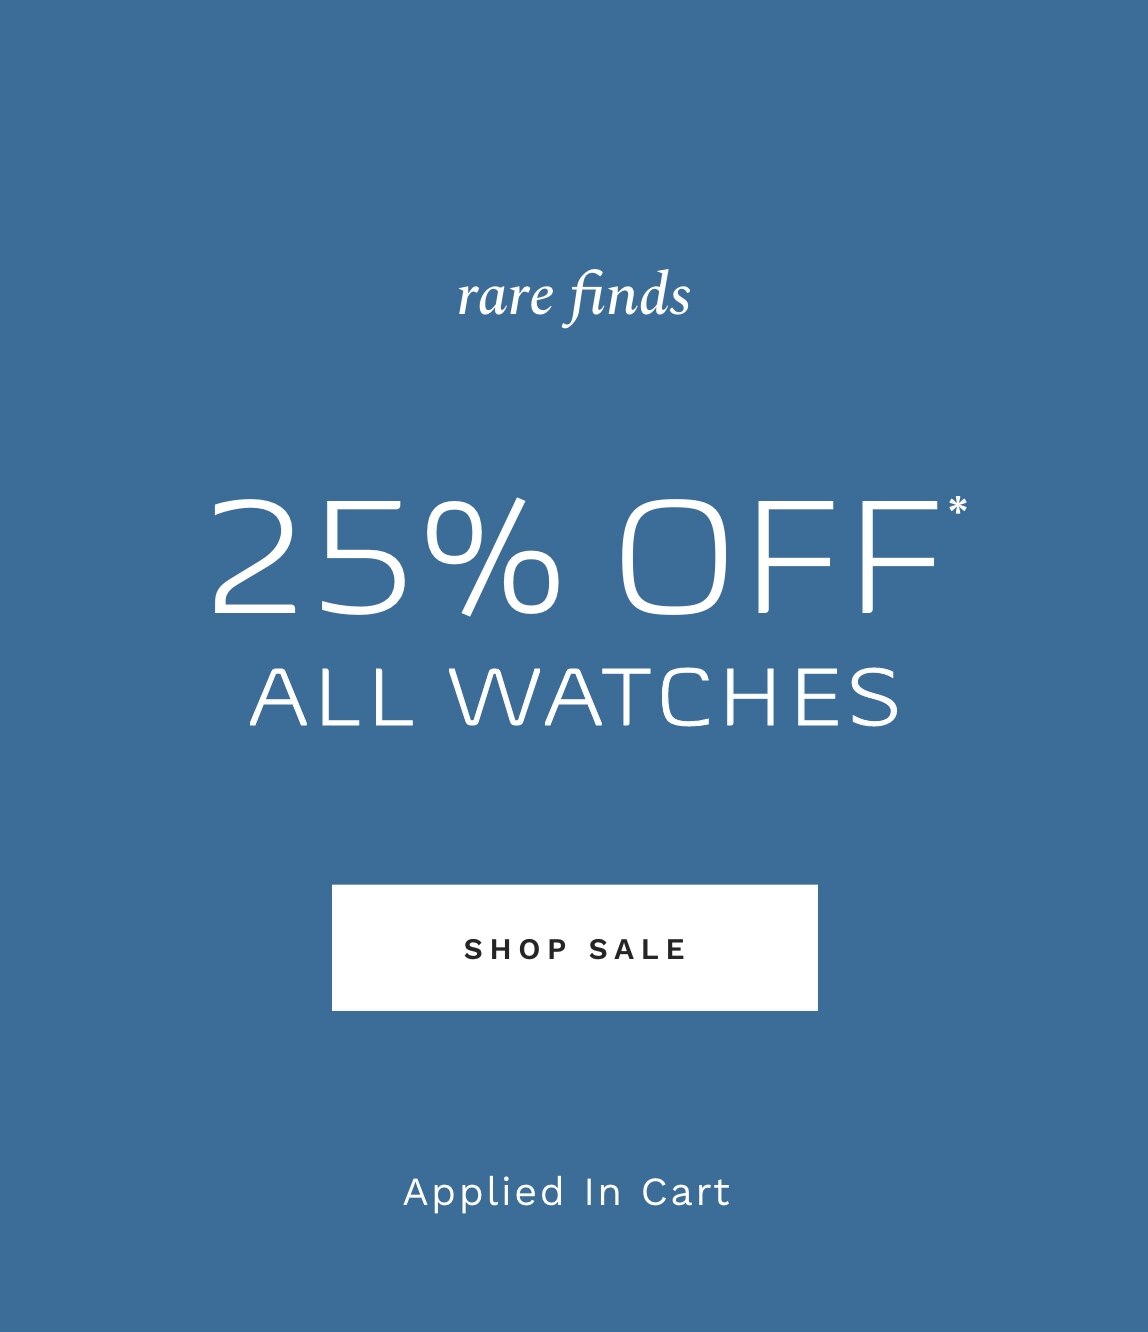 25% OFF* ALL WATCHES